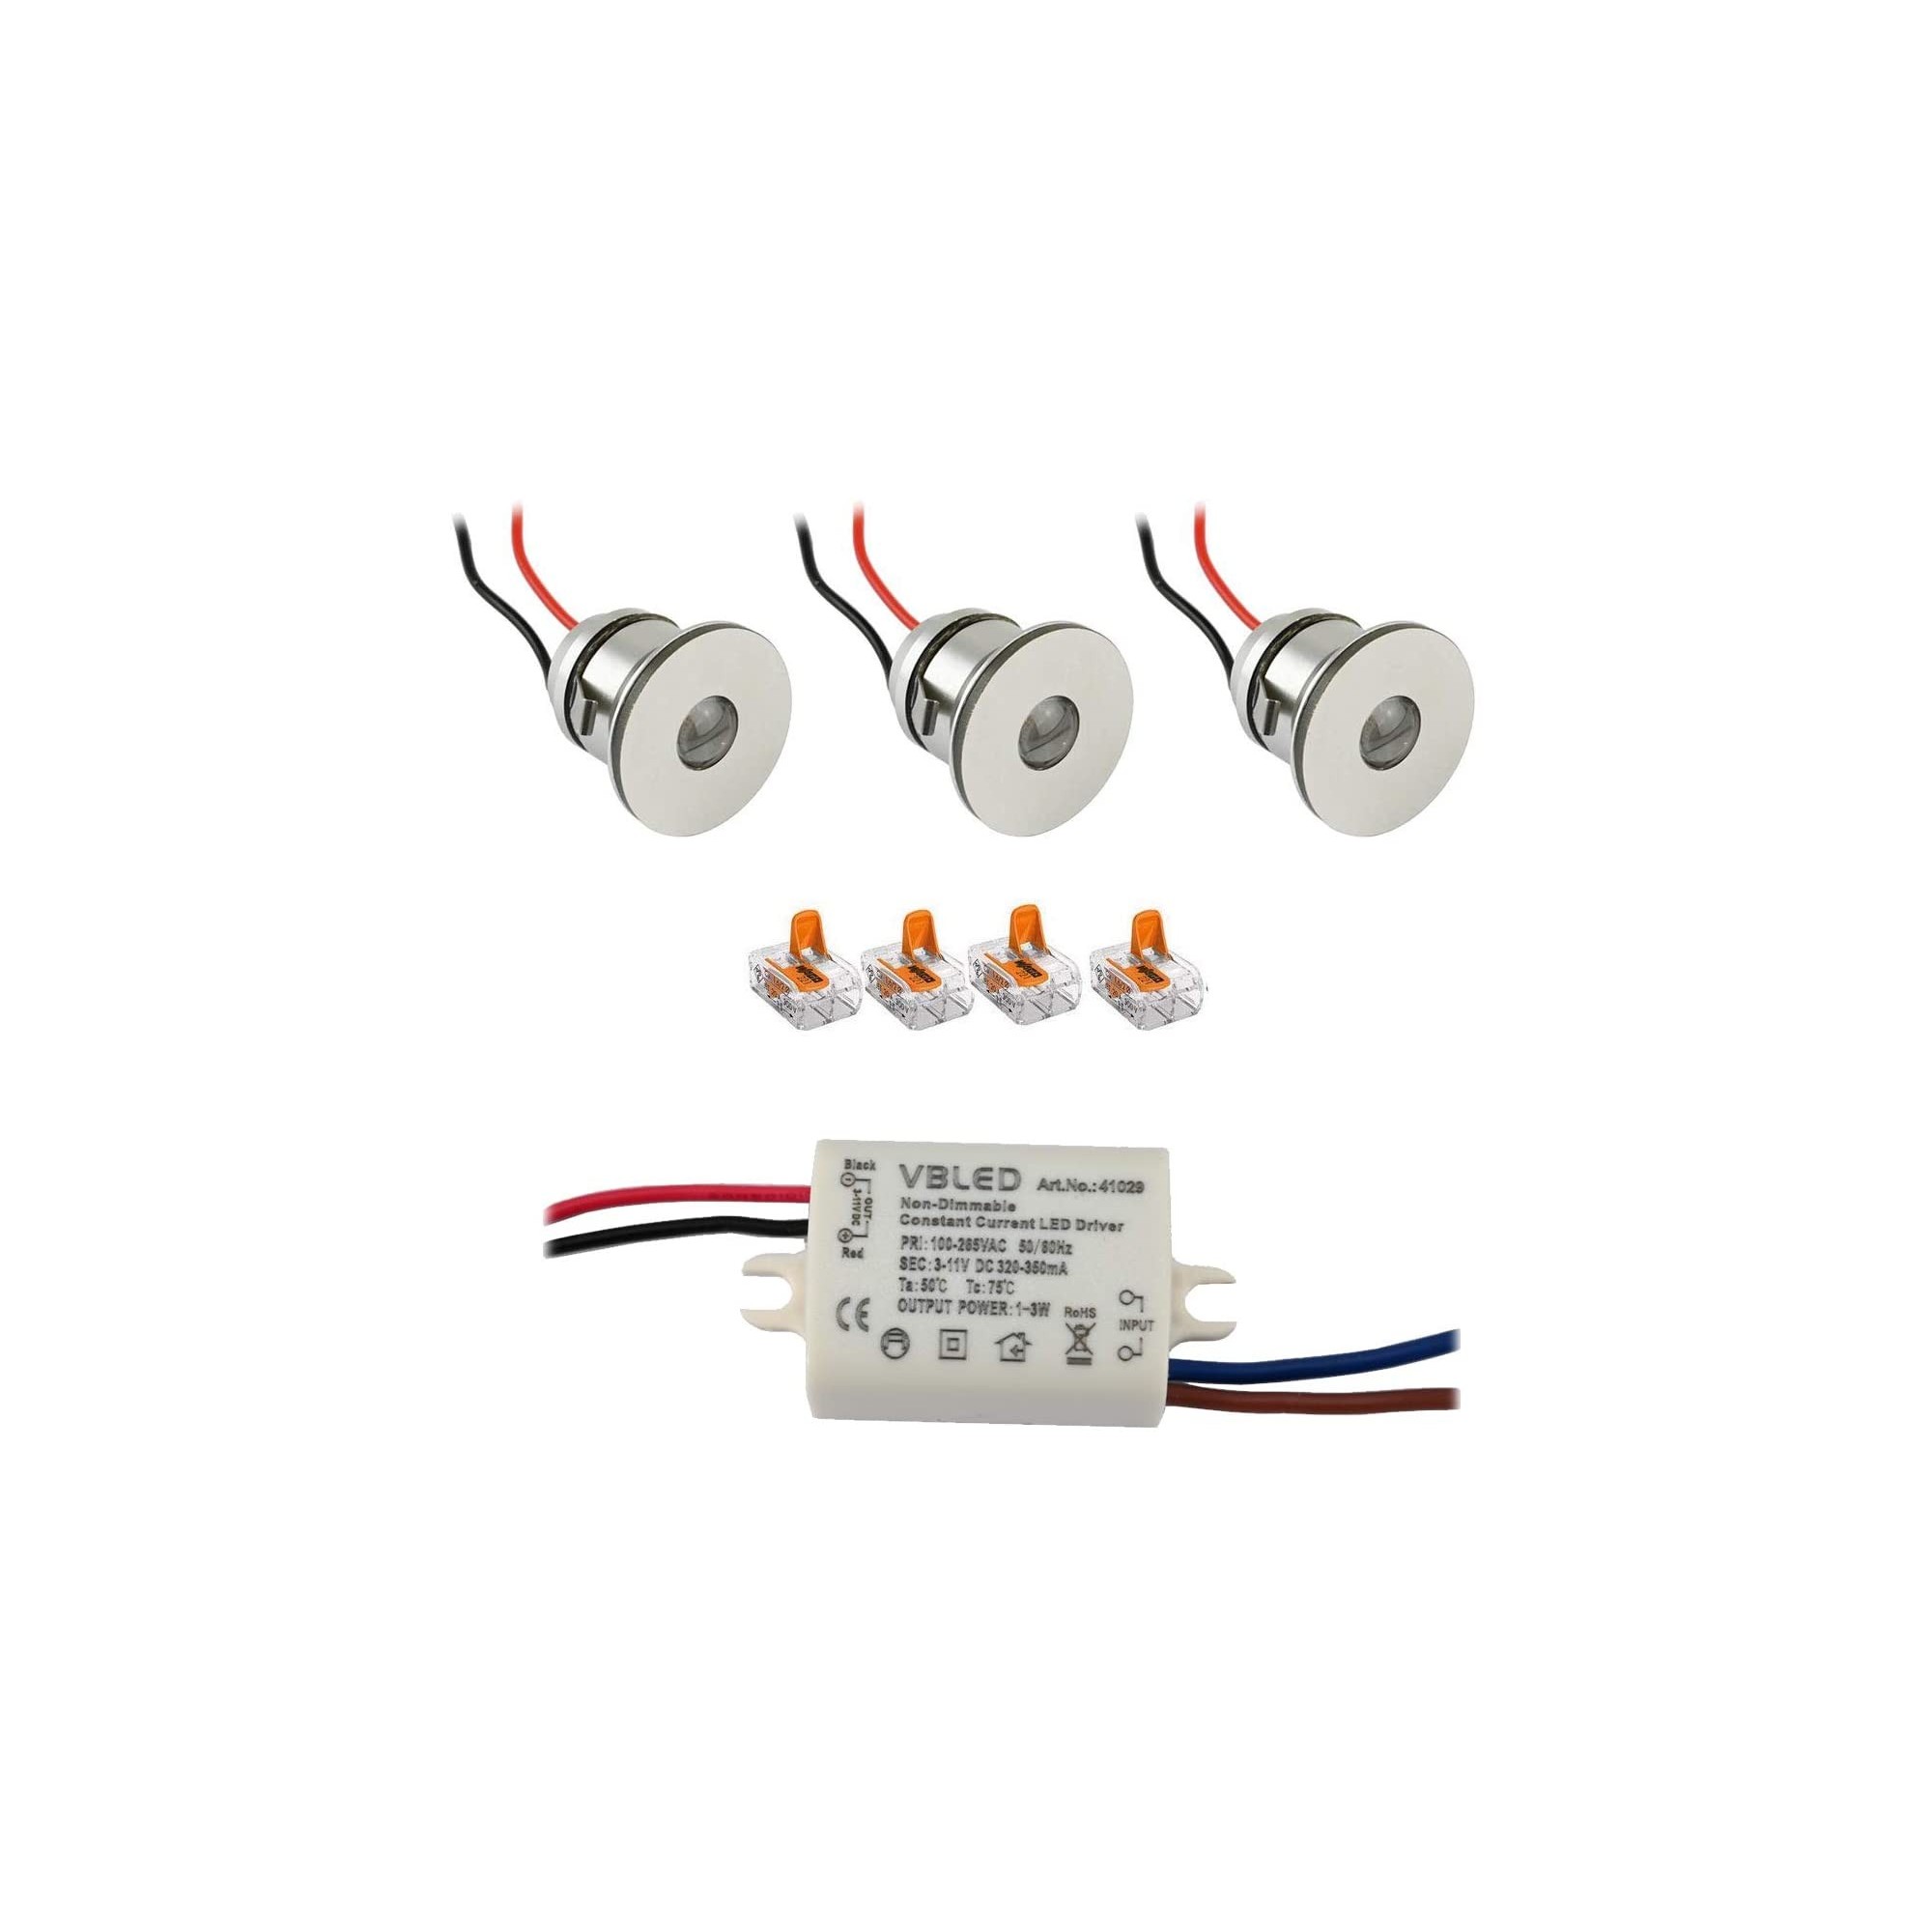 Set of 3 1W Mini LED Recessed Spot Recessed spotlight with power supply unit